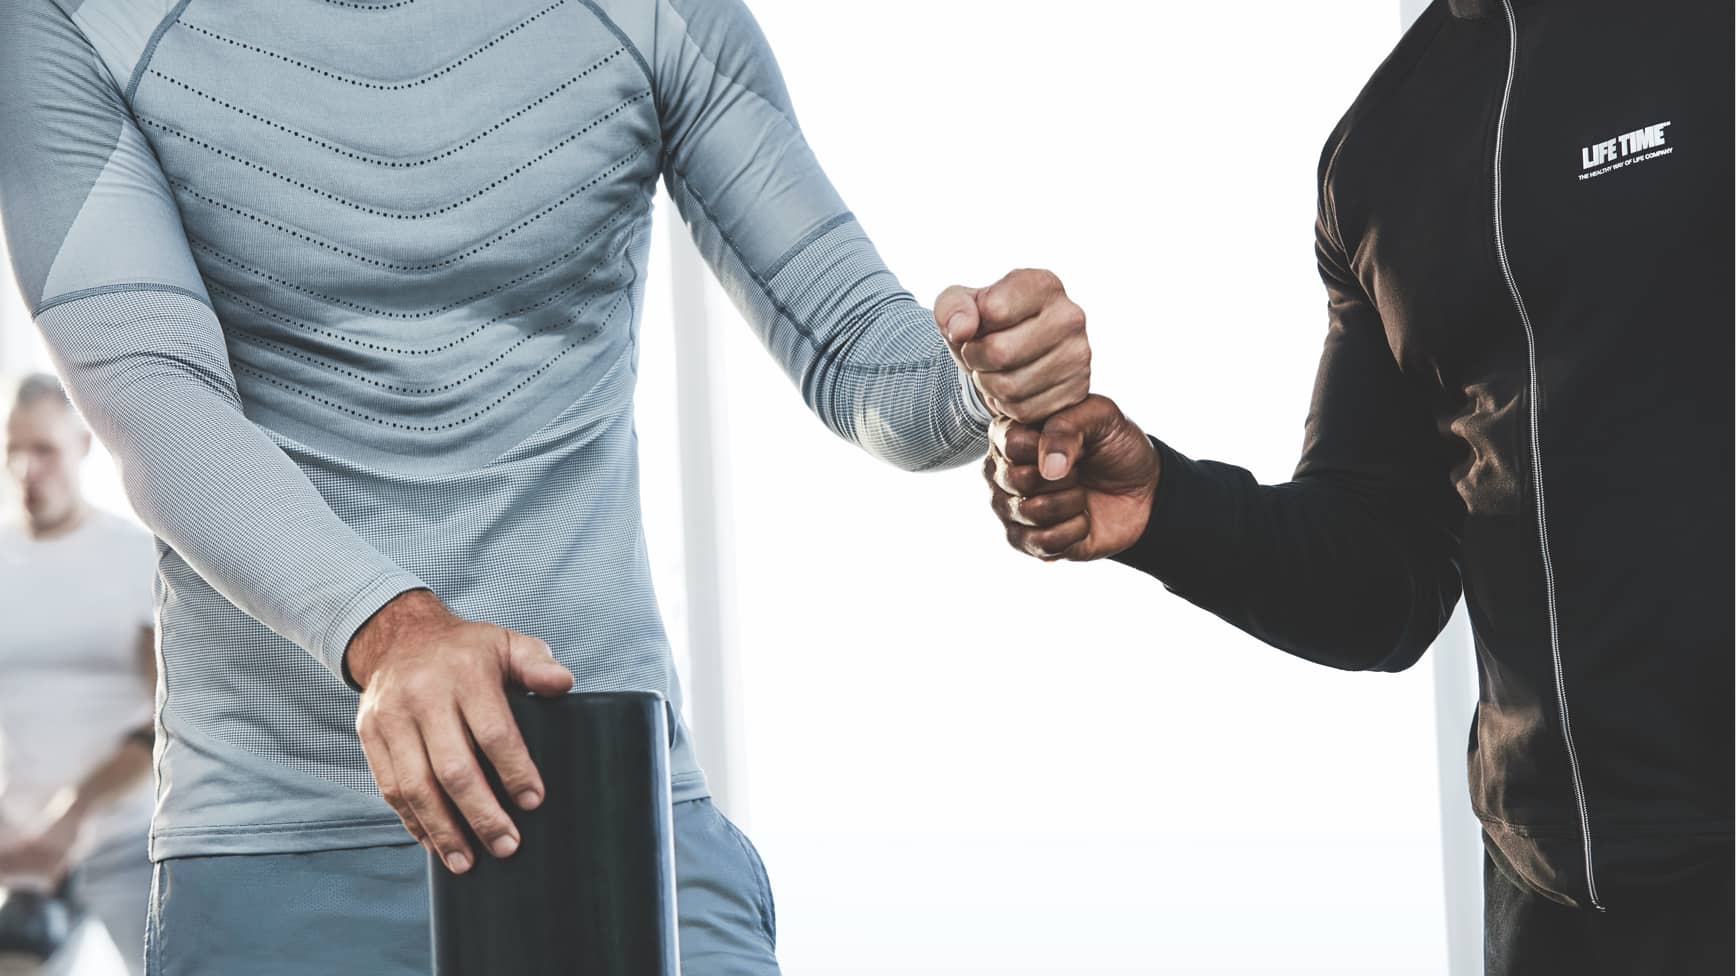 A trainer and his client share a fist bump during a workout